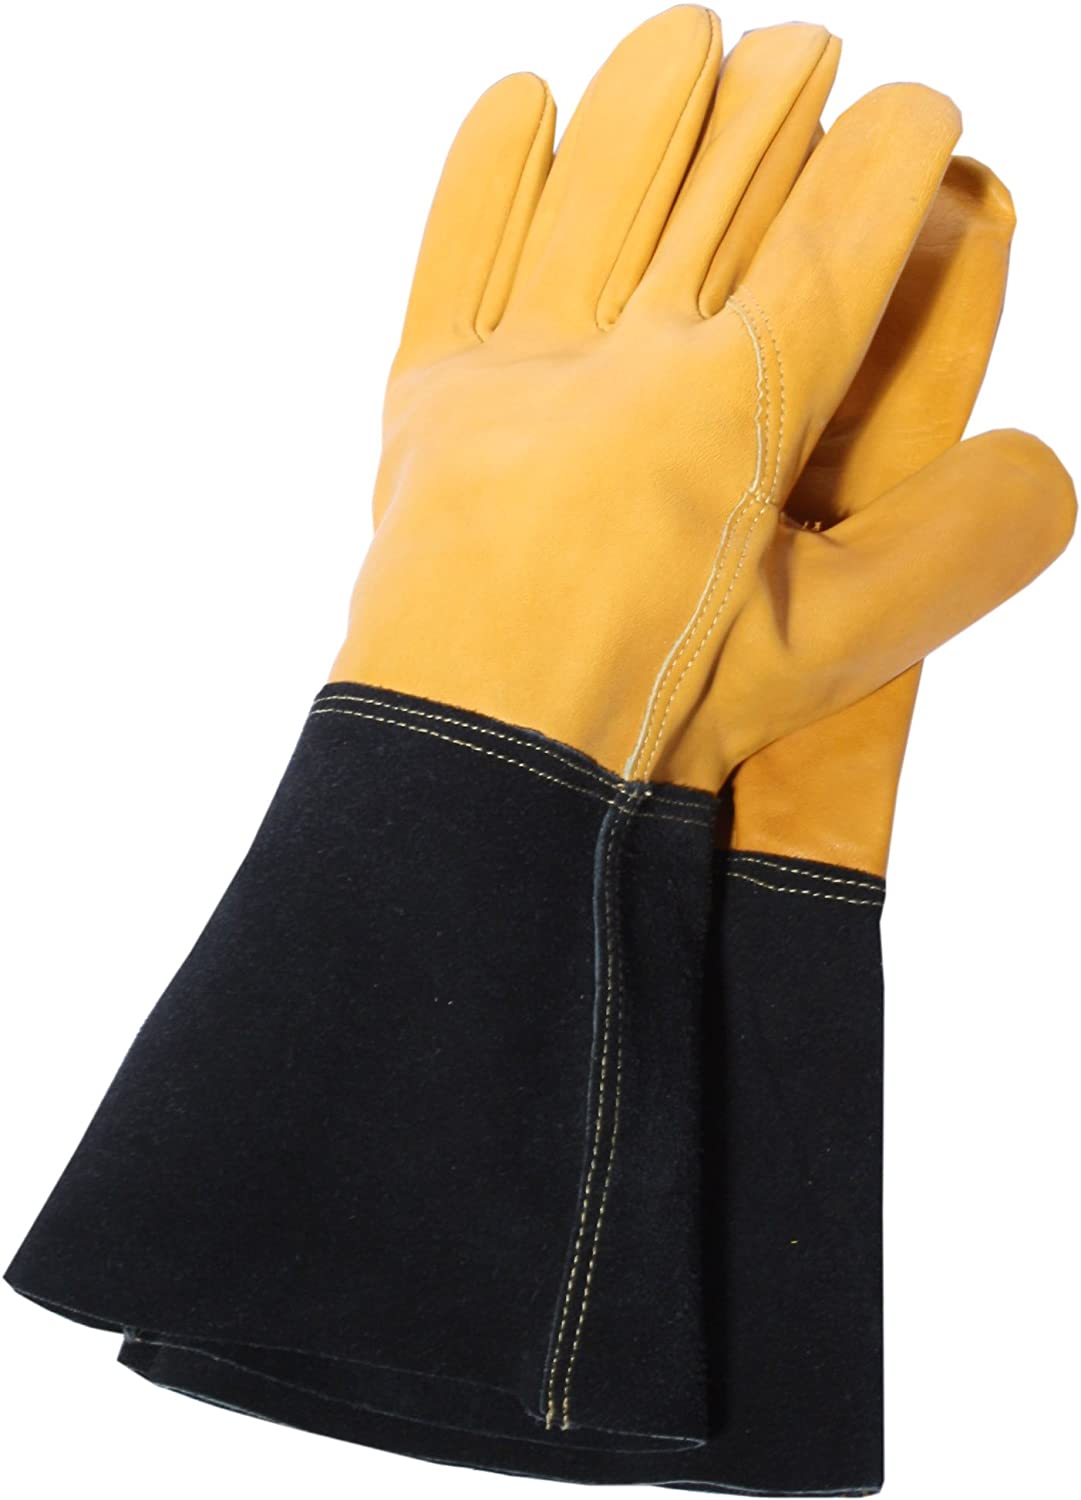 Town & Country Deluxe Premium Leather Gauntlet Gloves Large